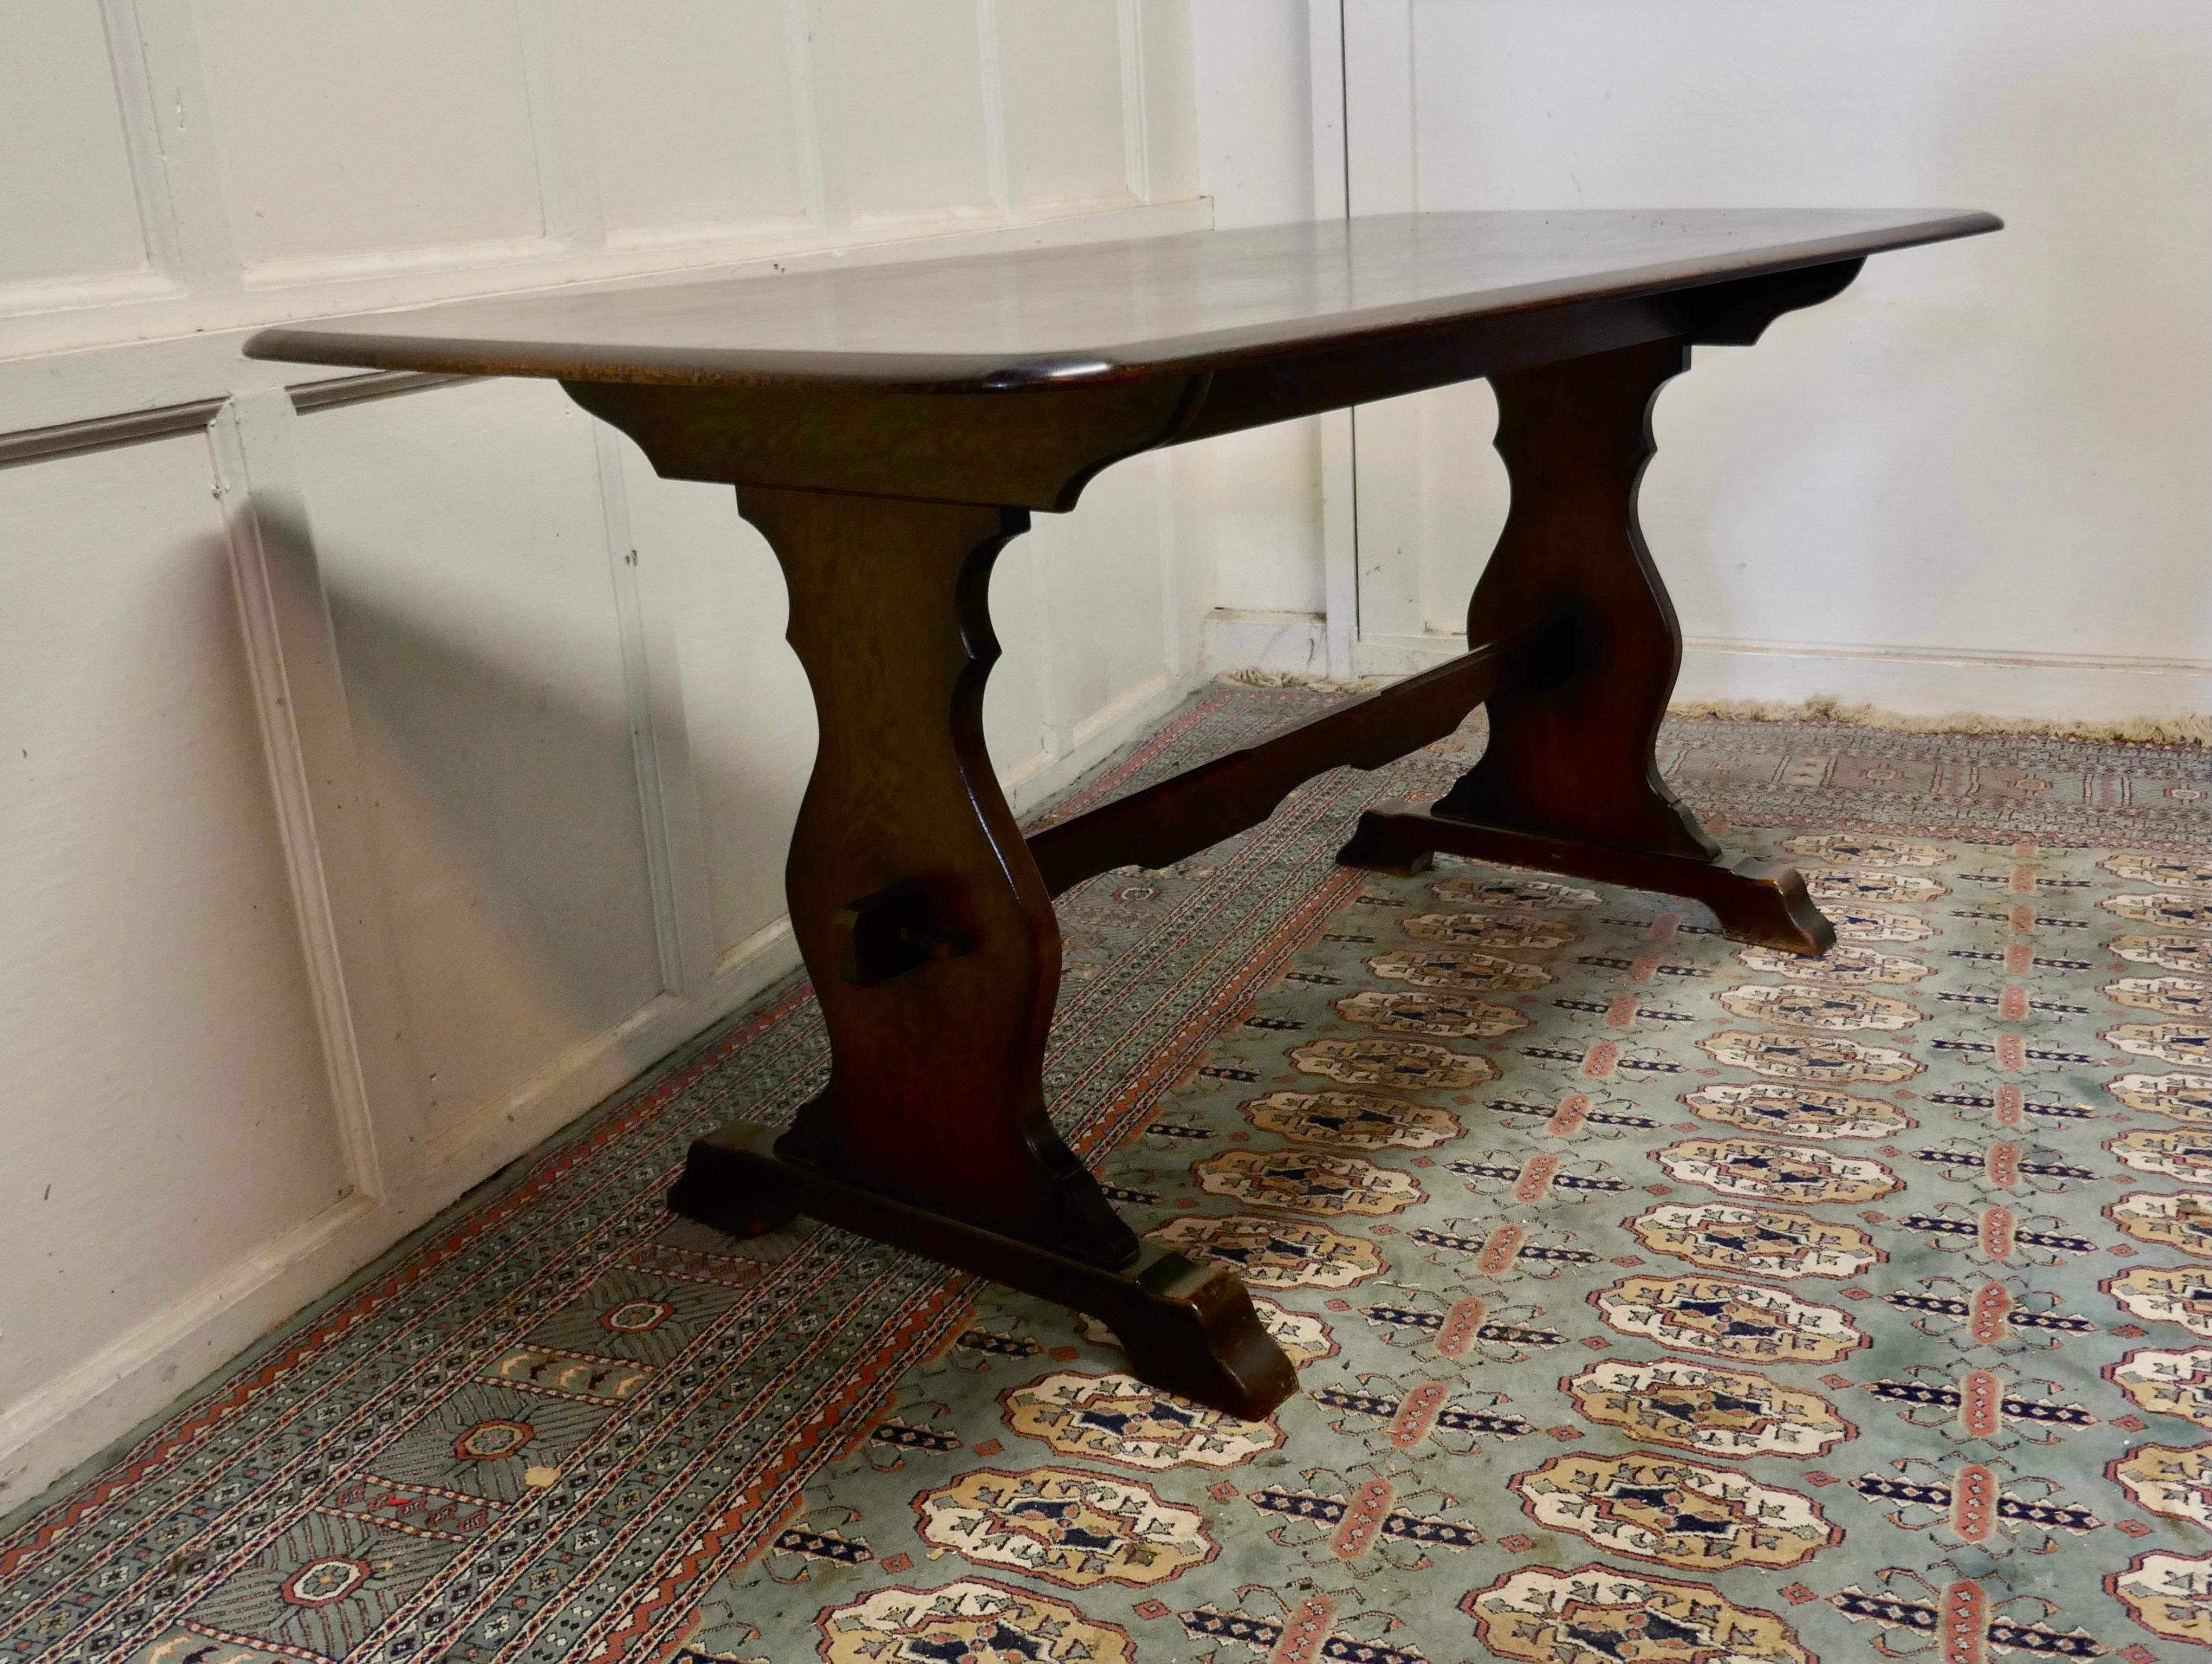 Oak refectory table by Webber of Croydon 

This is a superb piece it is a good quality oak country table, a refectory style table, the table has a 5 plank top and legs are in oak
 
The table is a beautiful deep colour, it has a good finish, it